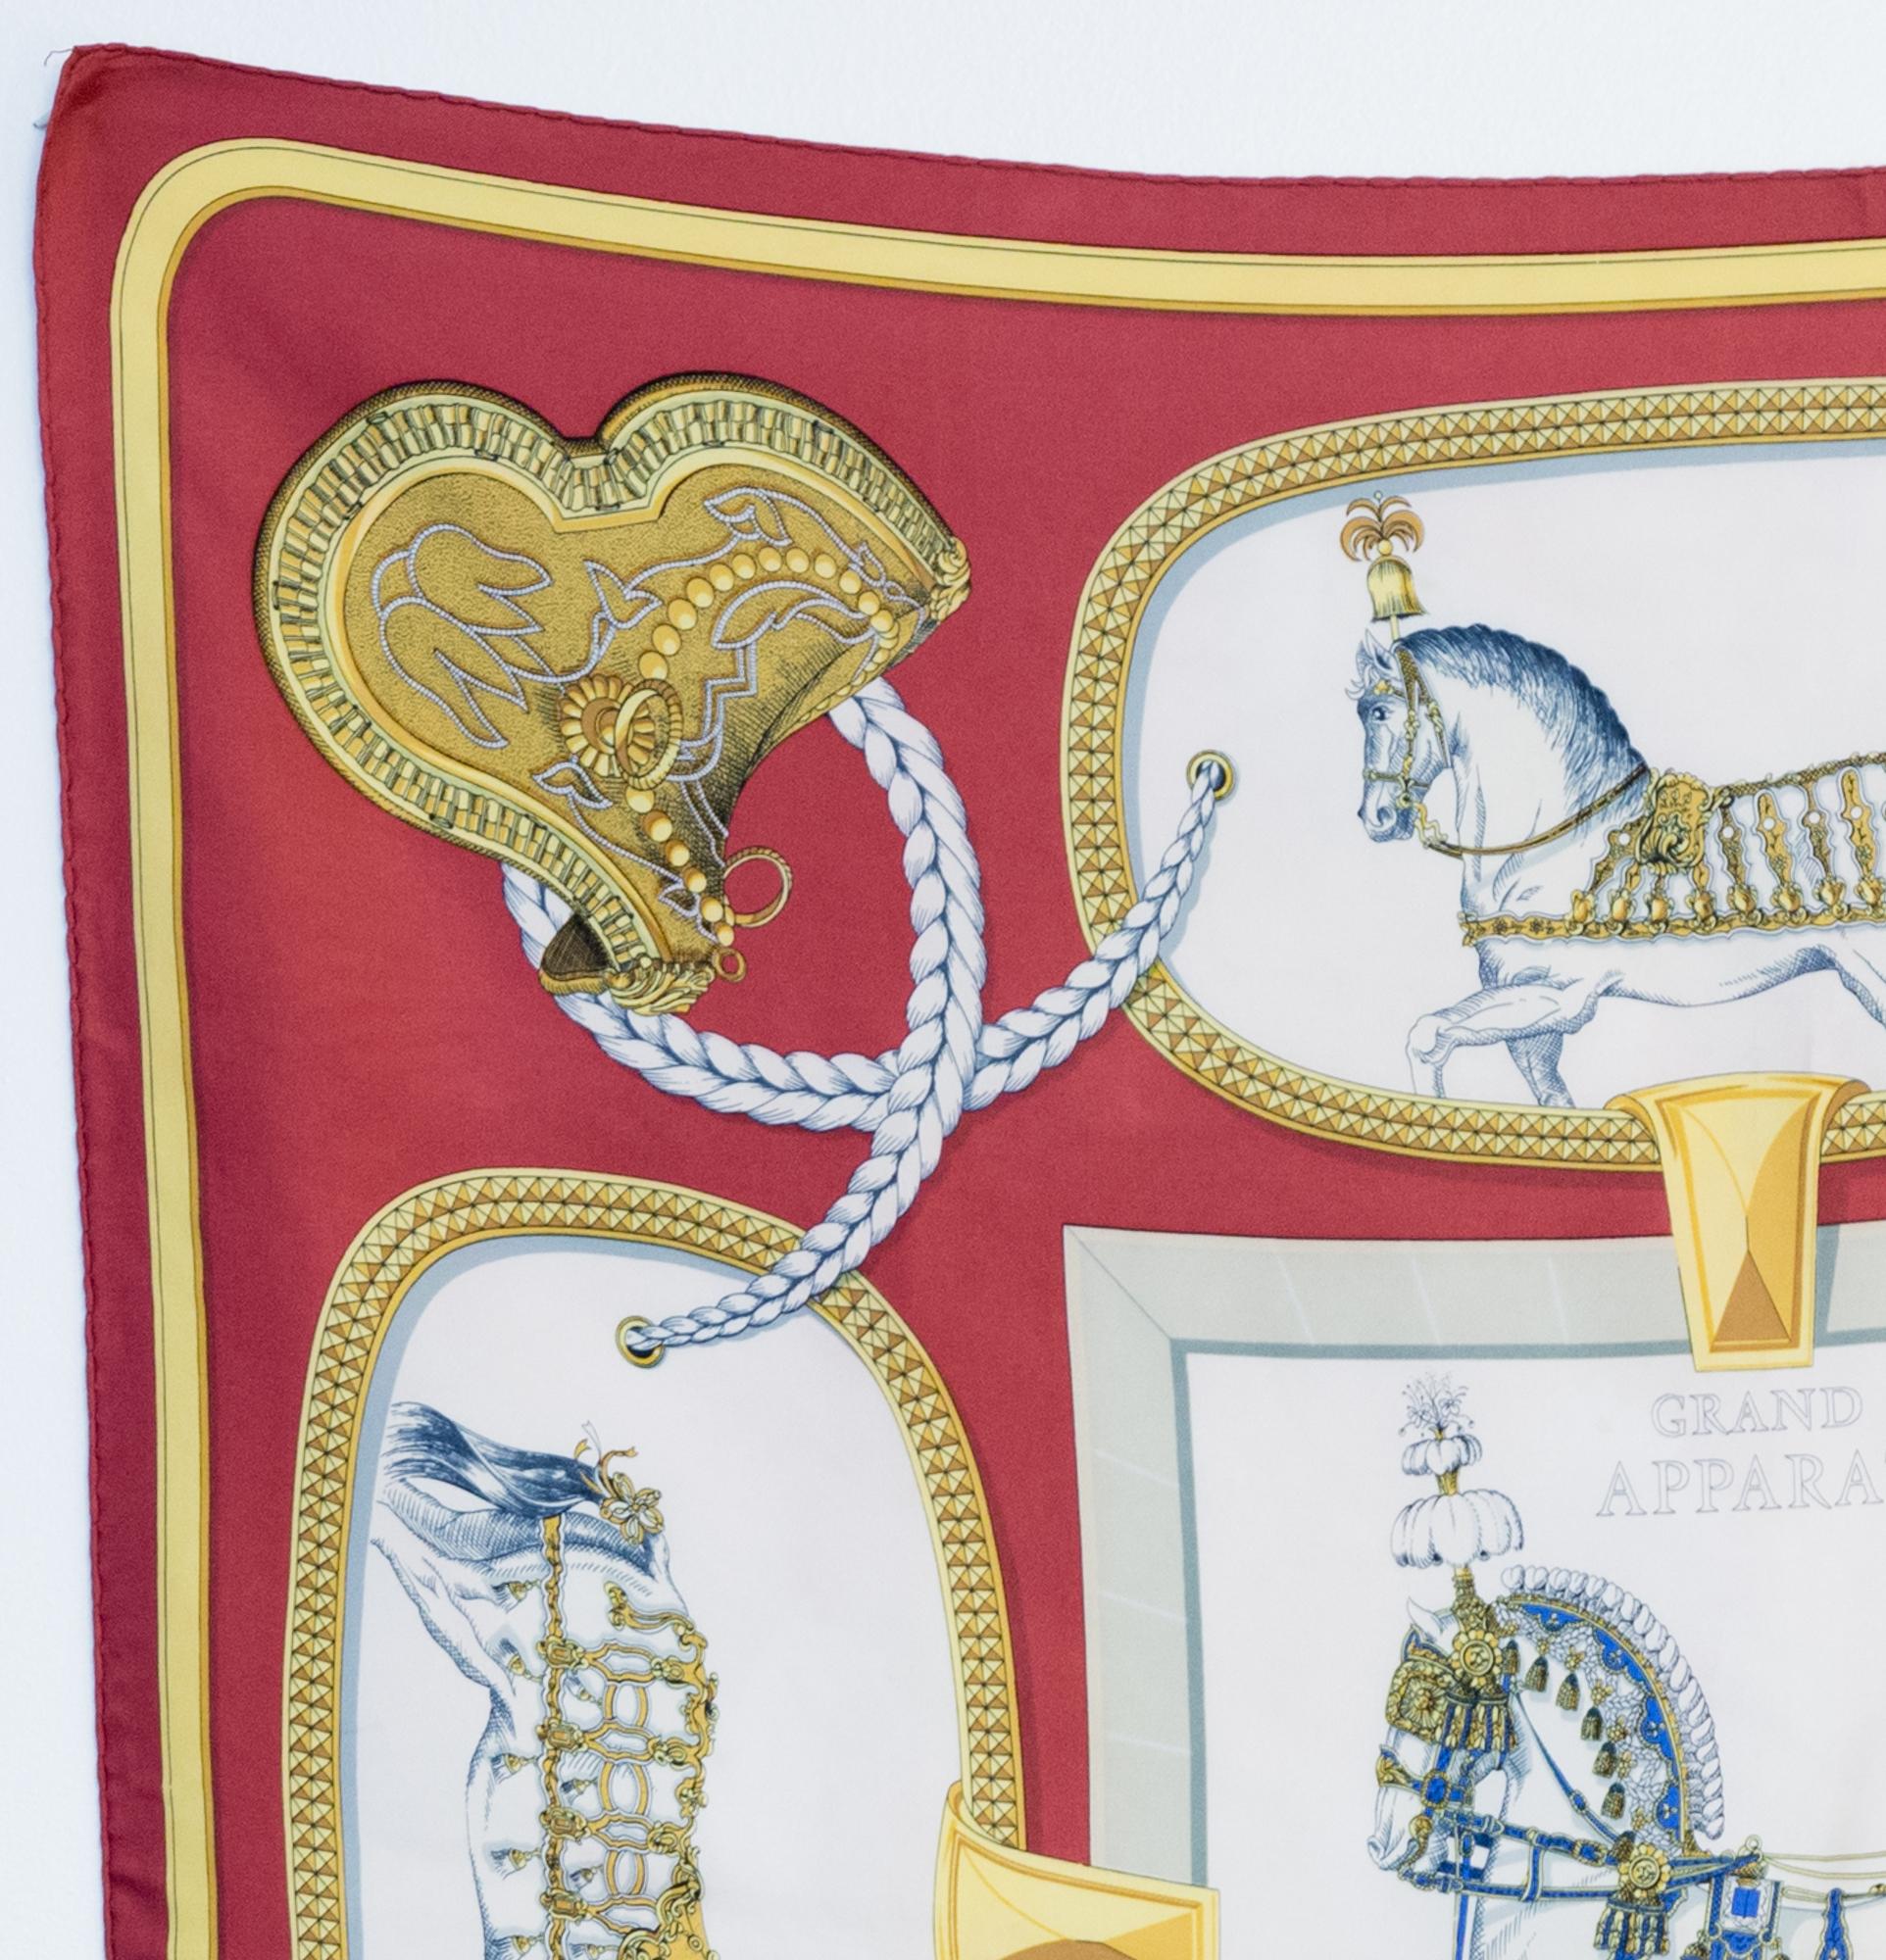 1962 Hermes silk scarf Grand Apparat by Jacques Eudel featuring a dark red border, a horse scene and a top signature.
In good vintage condition. (some discolourations on the ground due to his age) Made in France.
First edition 1962
35,4in. (90cm)  X